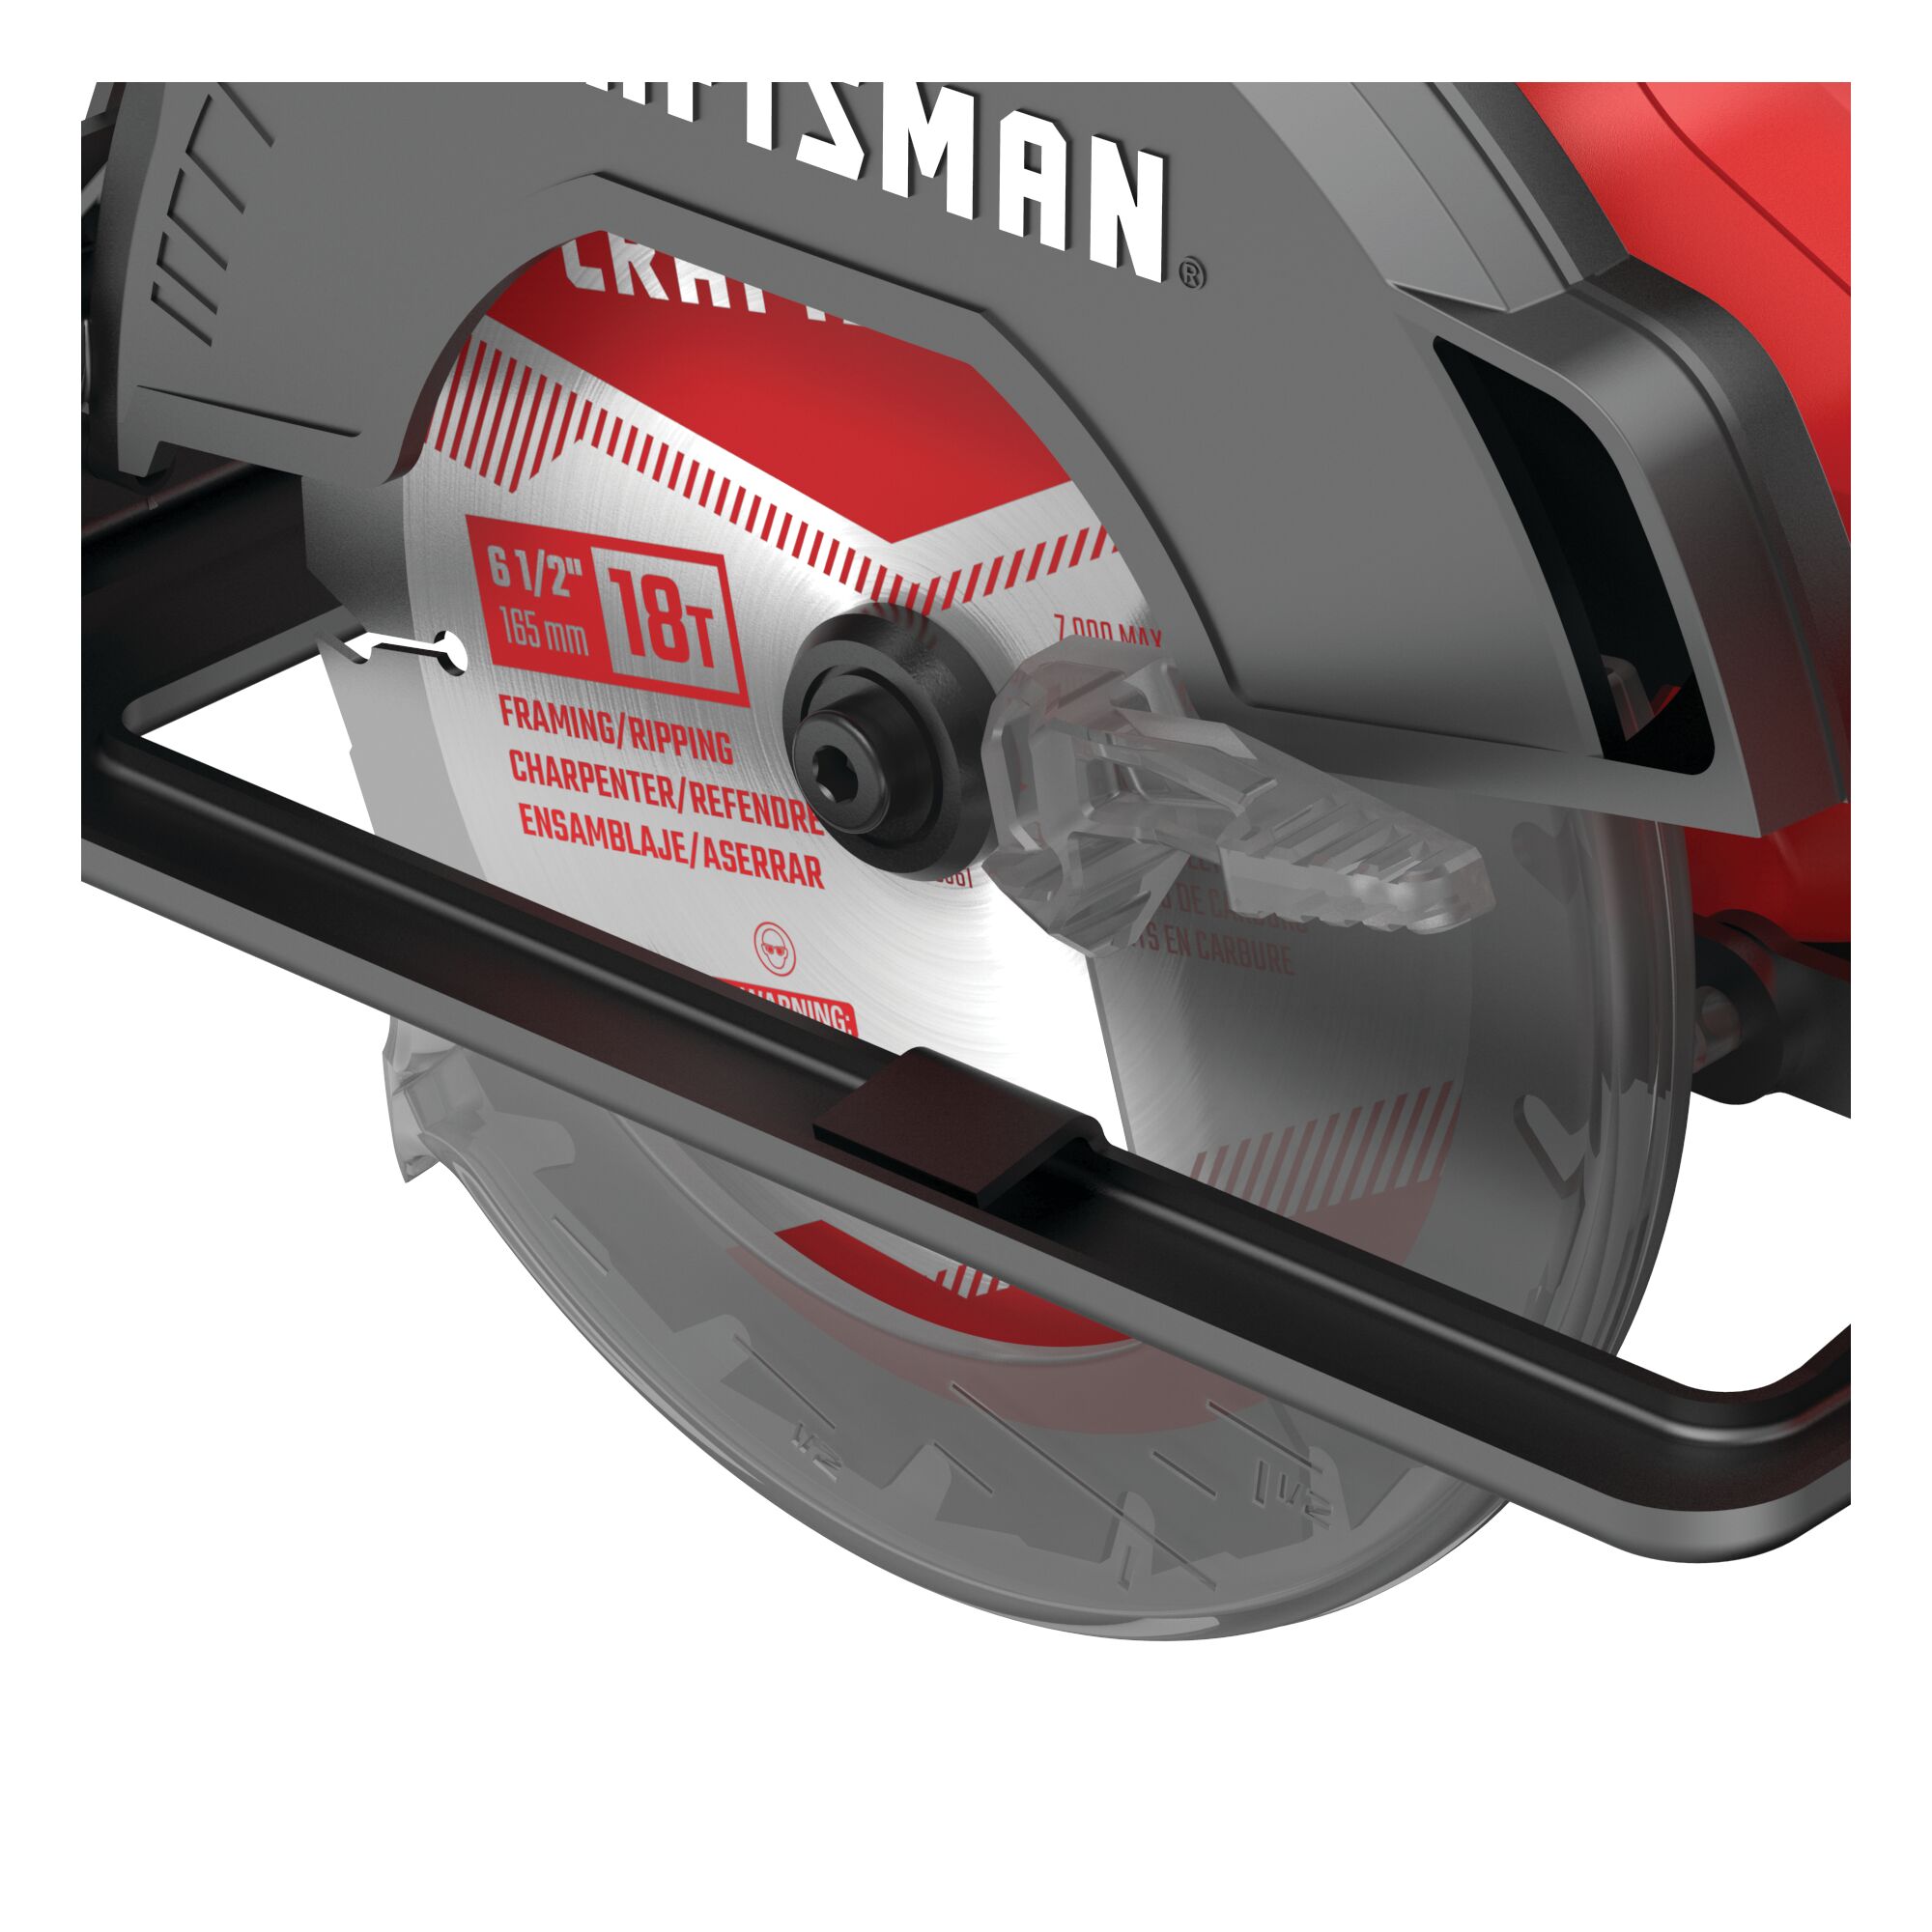 165 millimeter blade for cross cutting feature of 20 volt cordless 6 1 half inch circular saw kit.